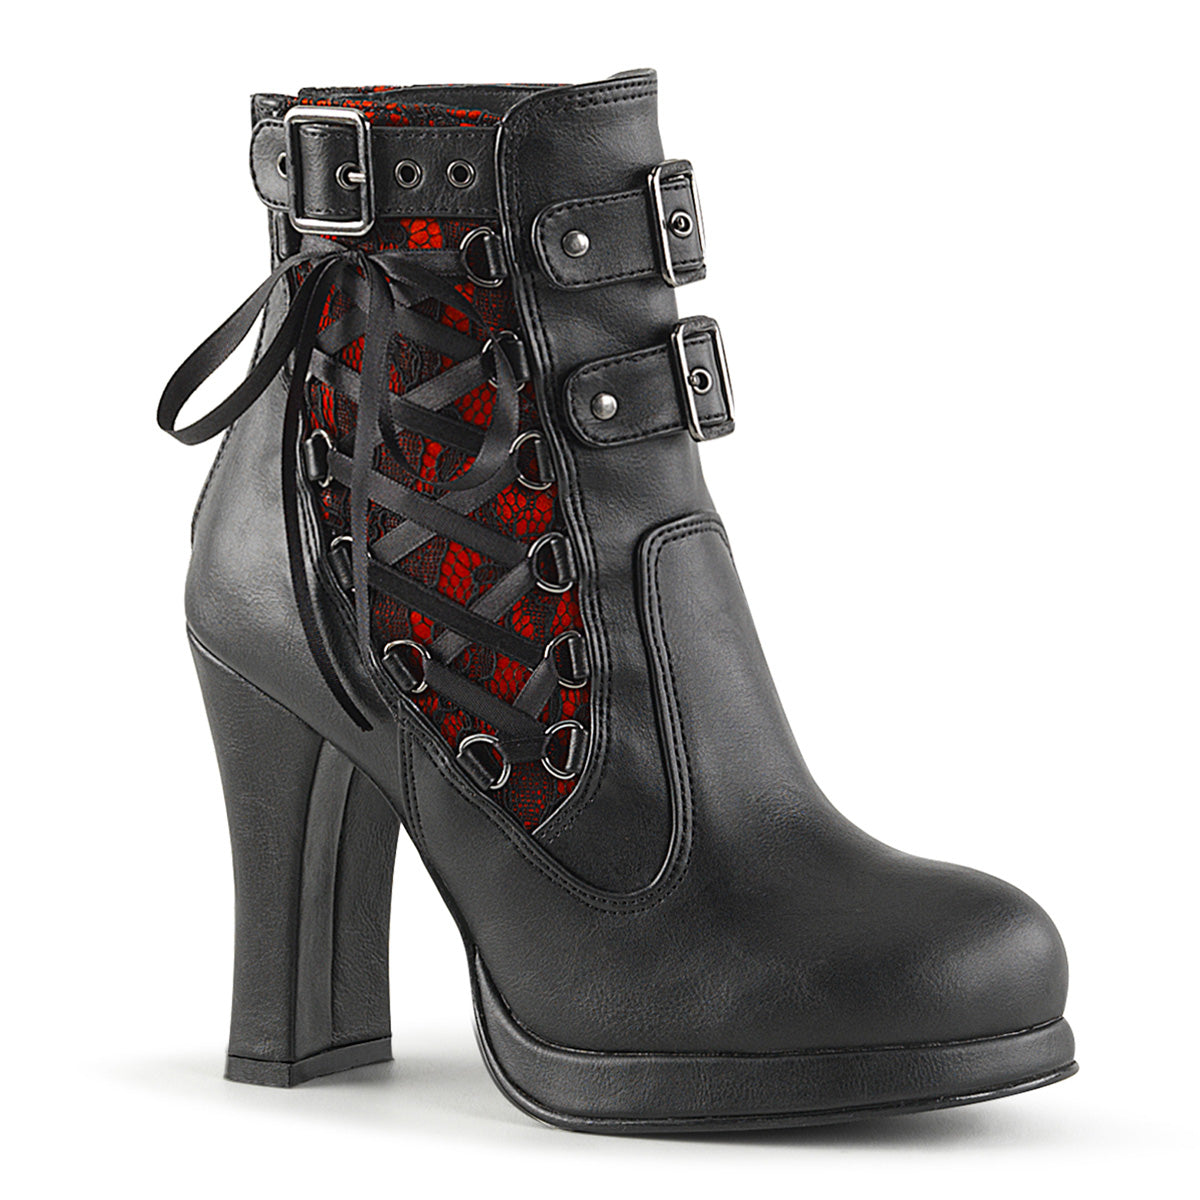 CRYPTO-51 Black-Red Lace Vegan Leather Ankle Boot Demonia